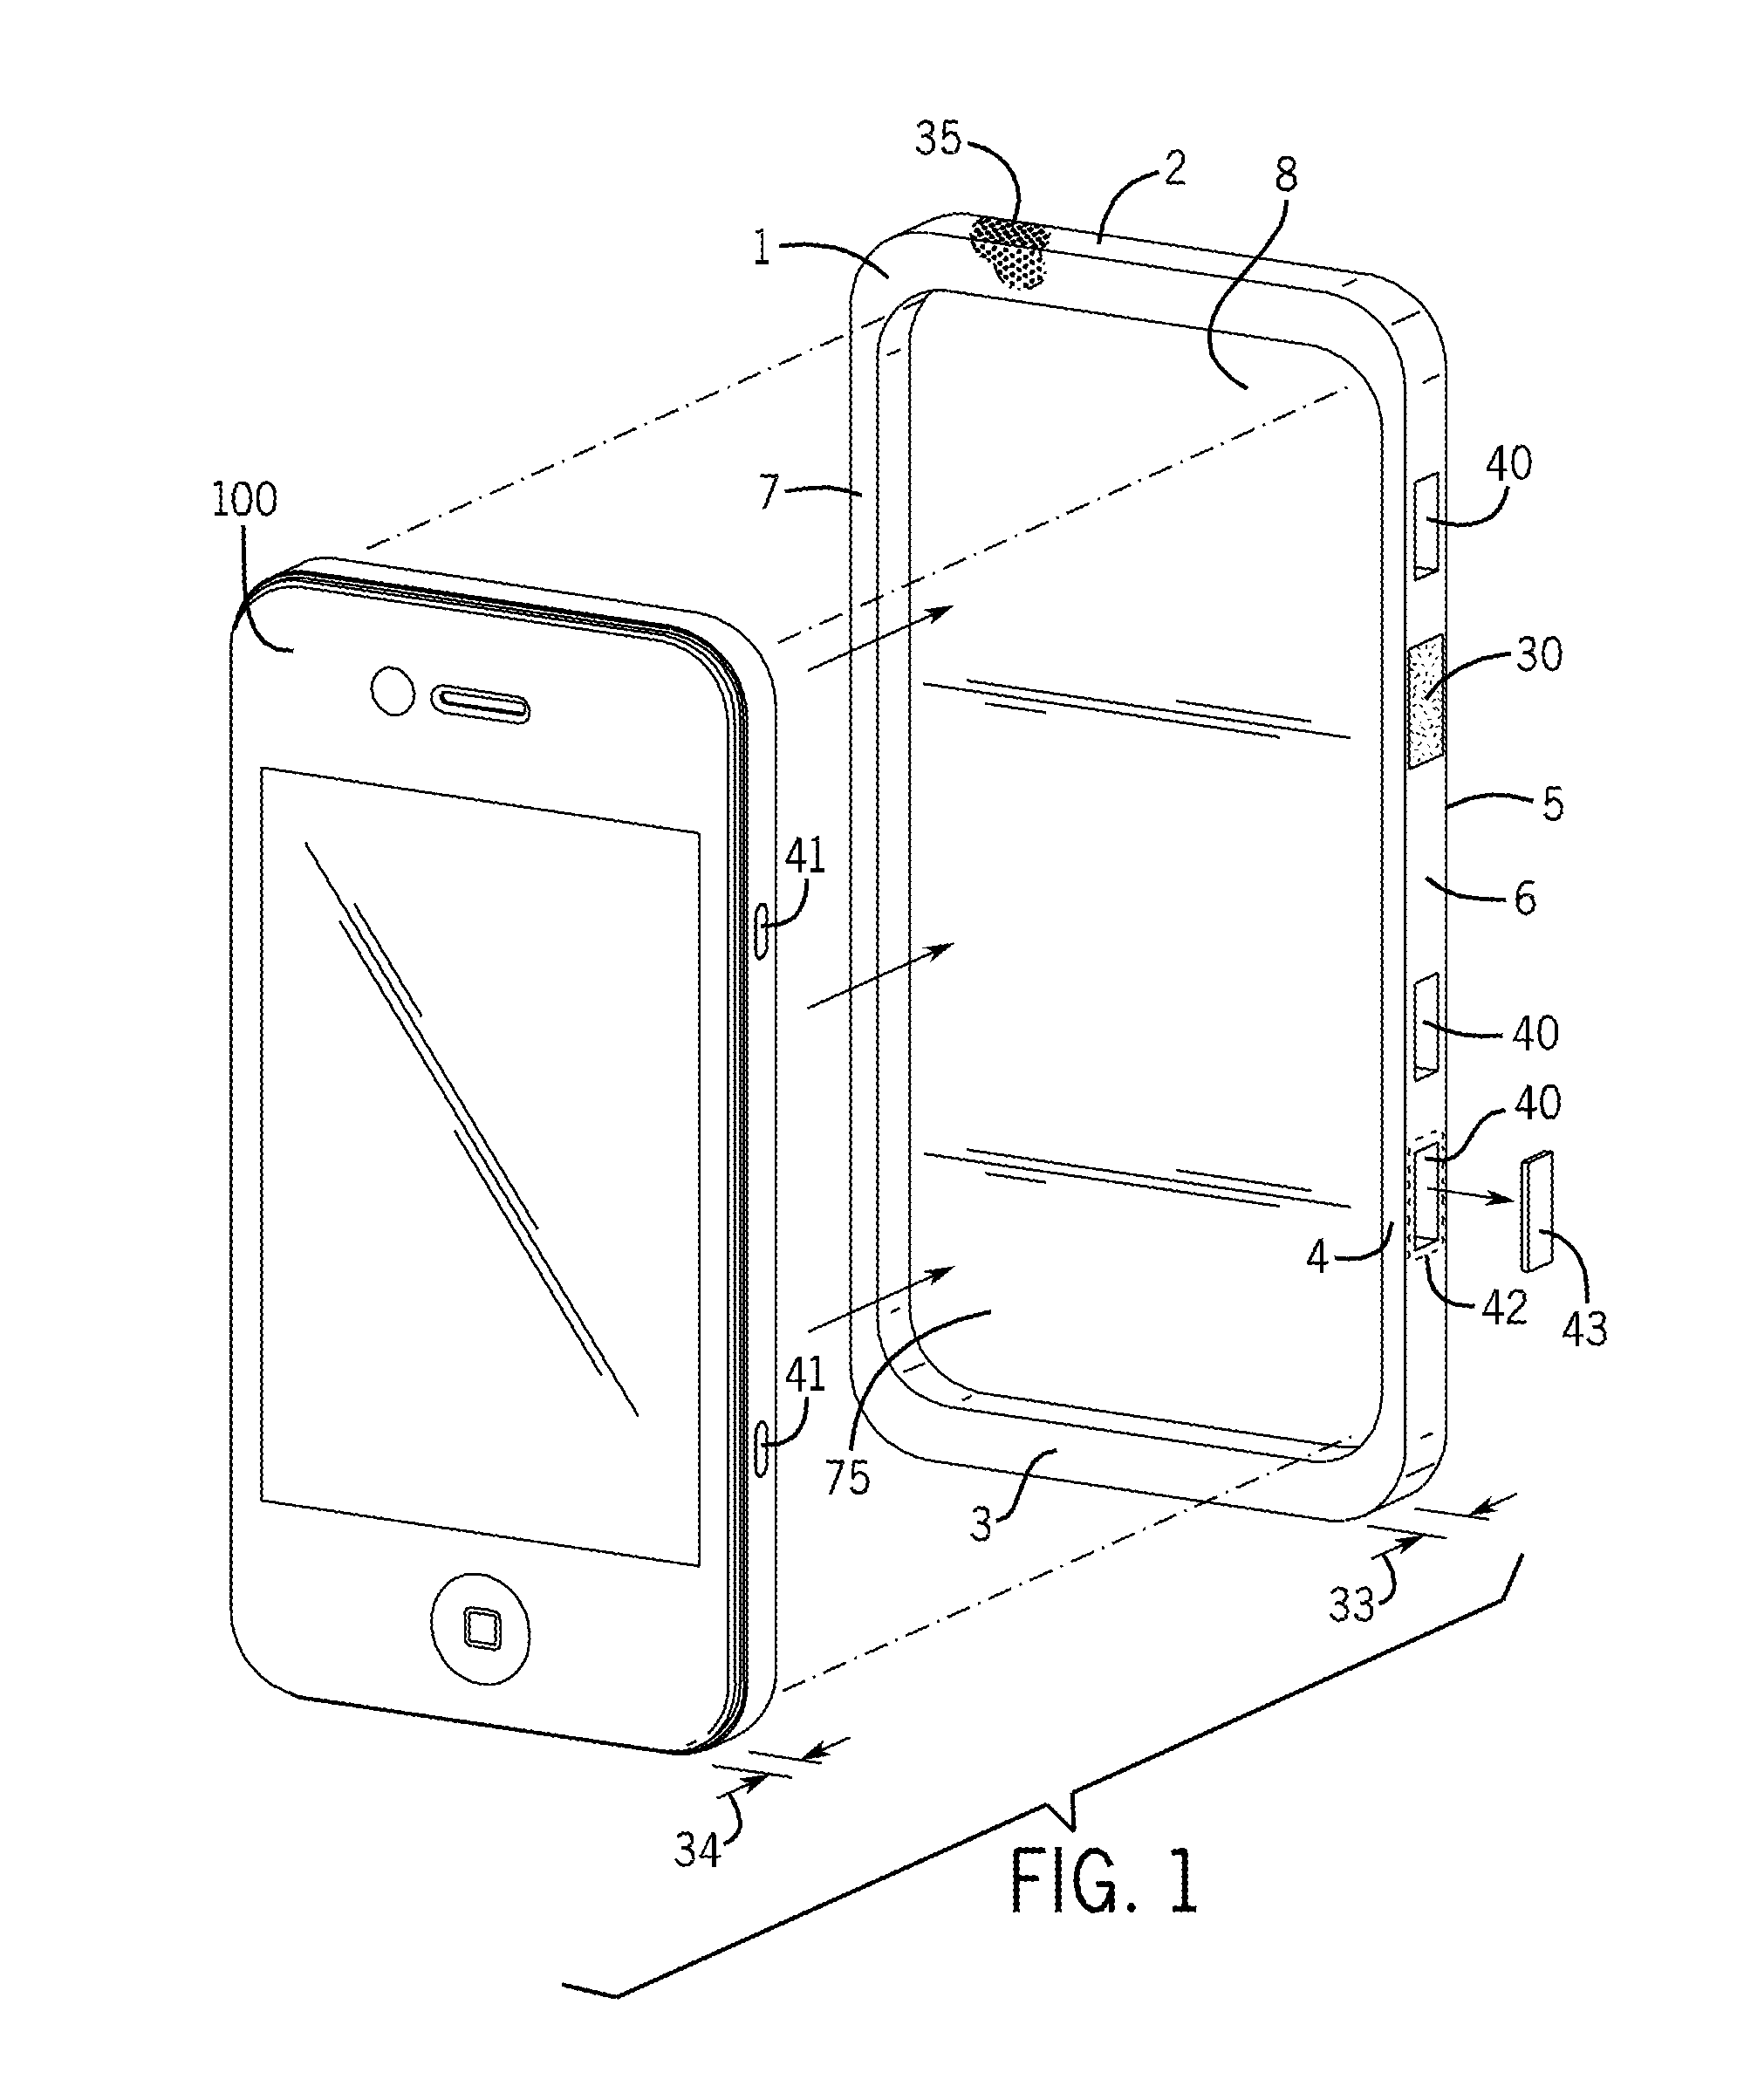 Holding device for phone or other electronic device